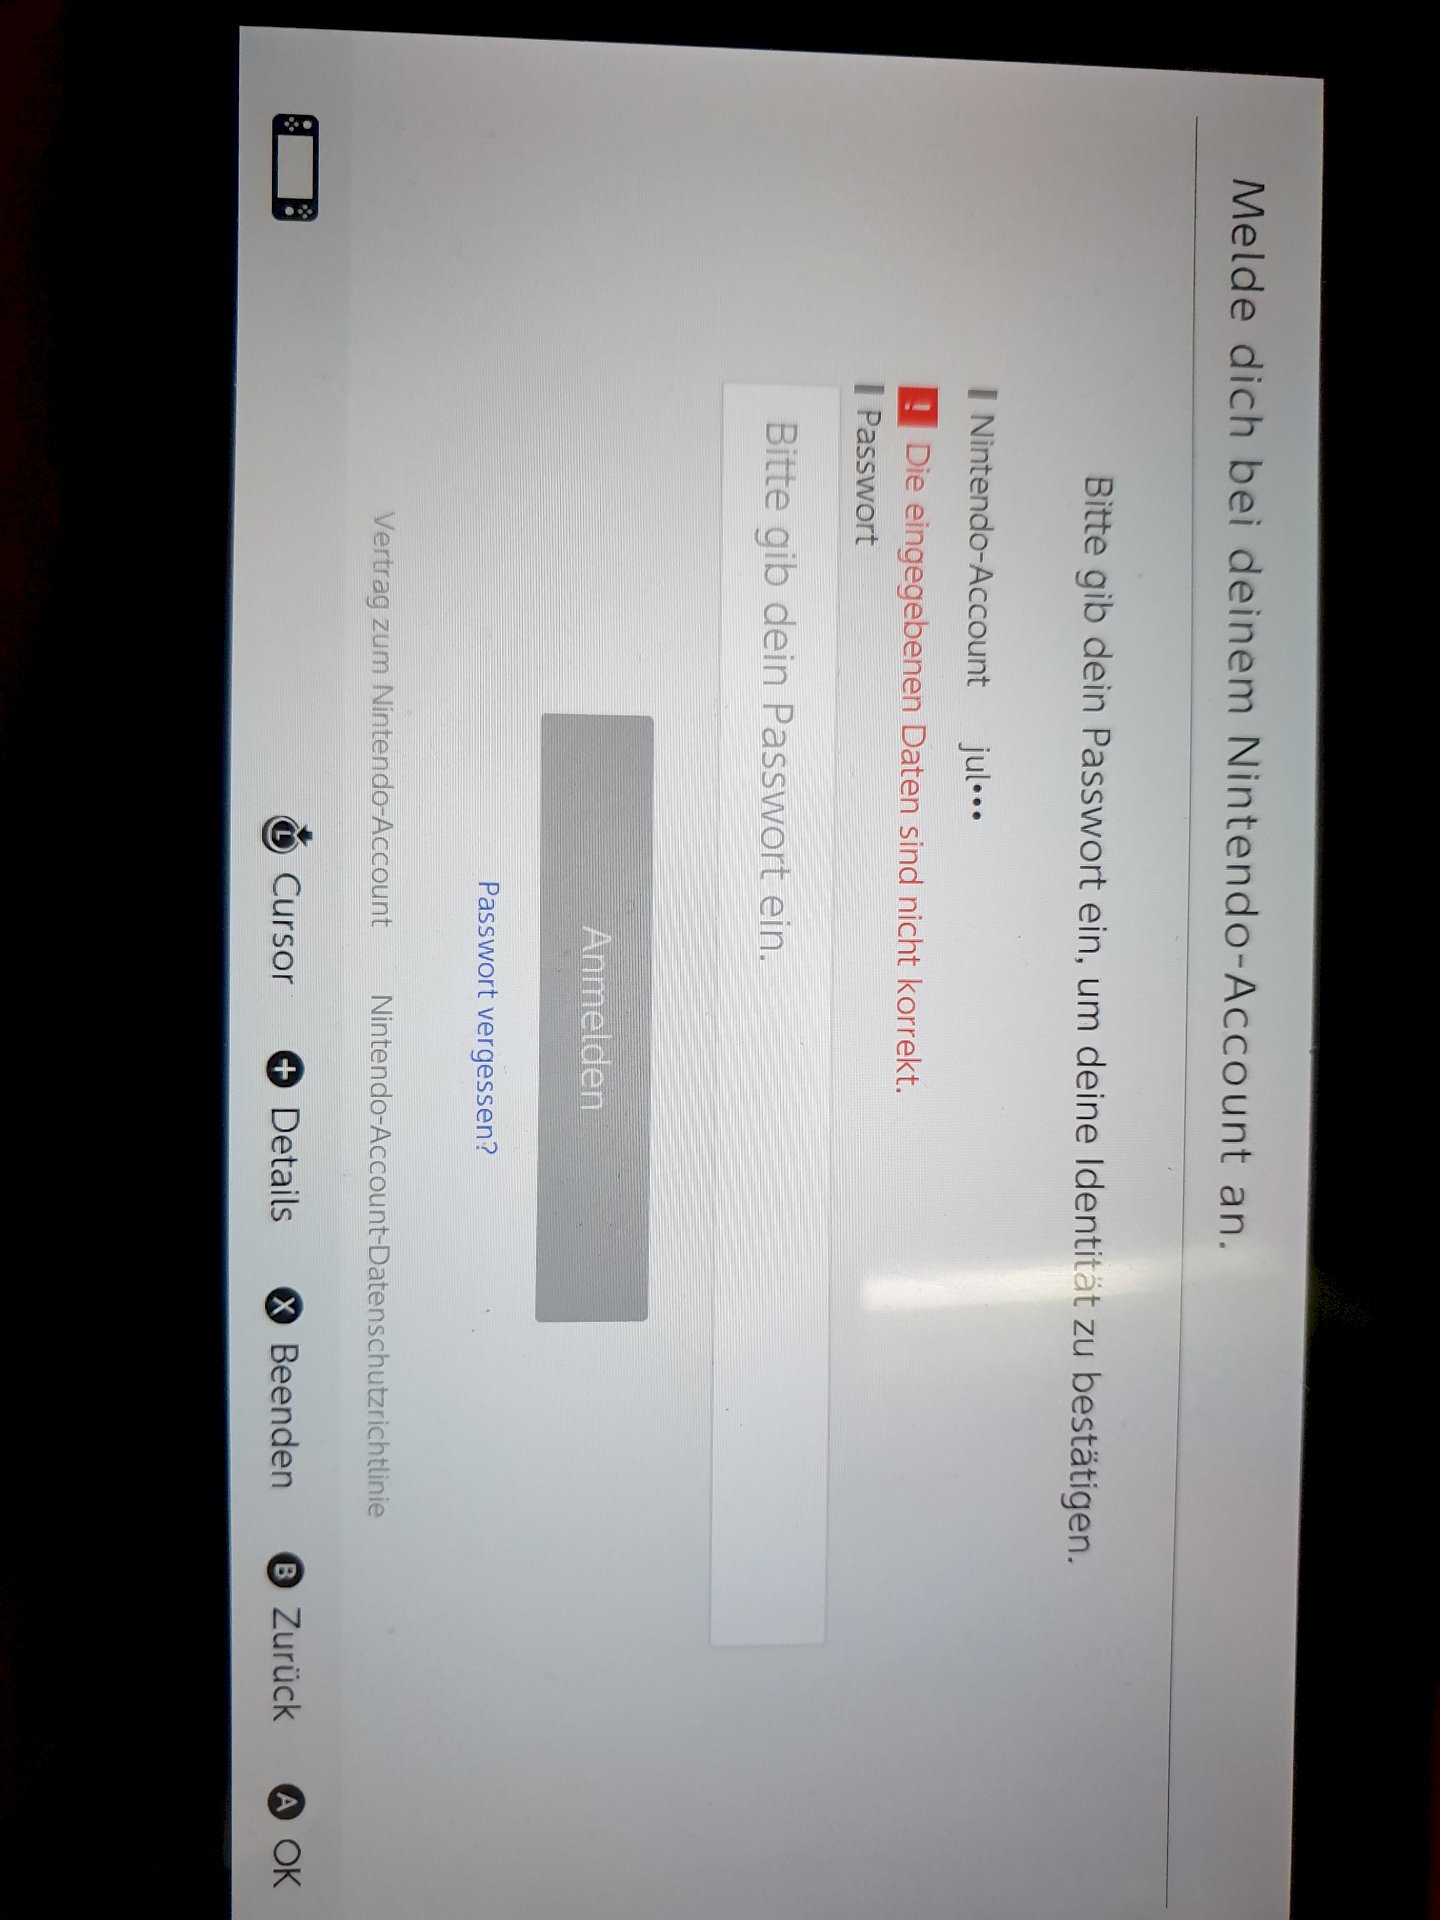 How can I reset my child Nintendo Account password if I do not remember the main account information